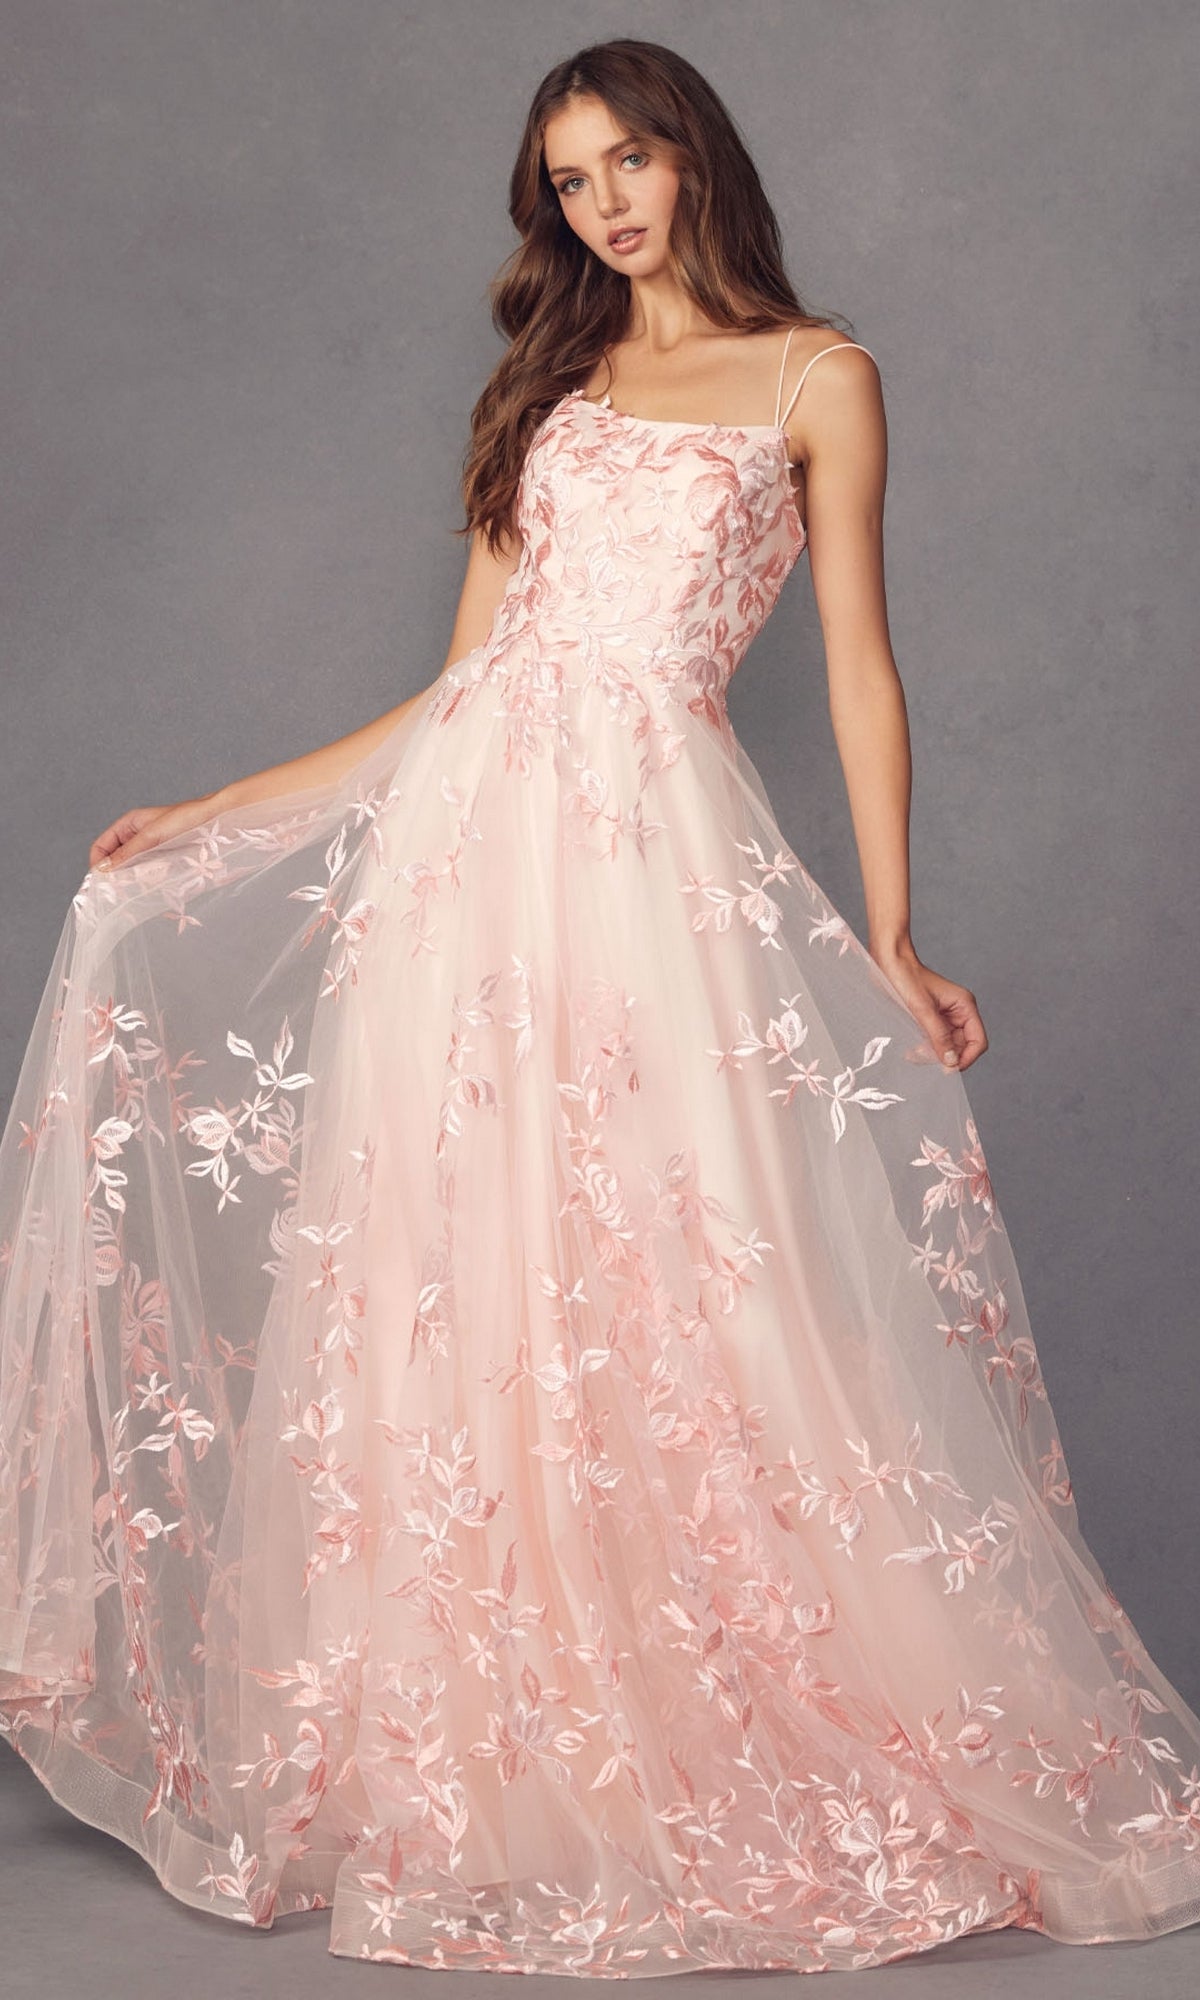 Embroidered-Lace Long A-Line Prom Ball Gown 279